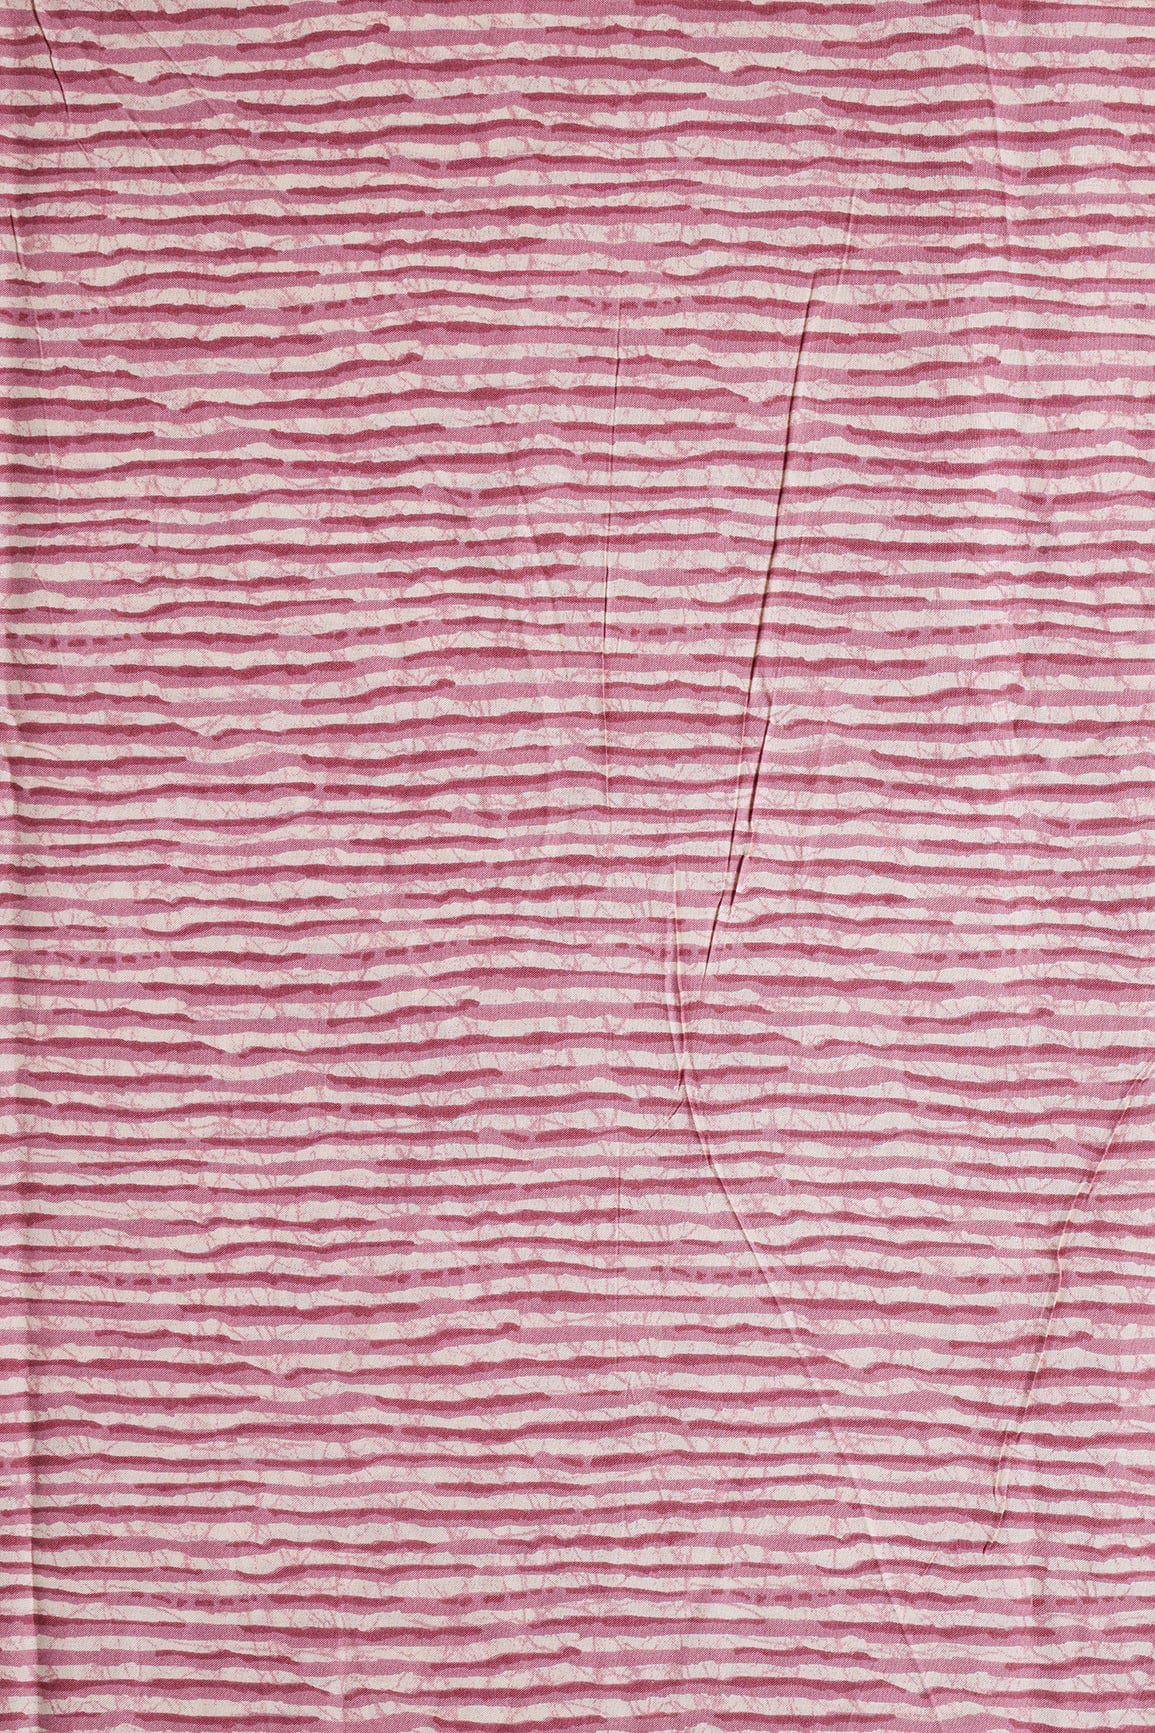 doeraa Prints Lavender Pink And Cream Stripes Print On Pure Rayon Fabric